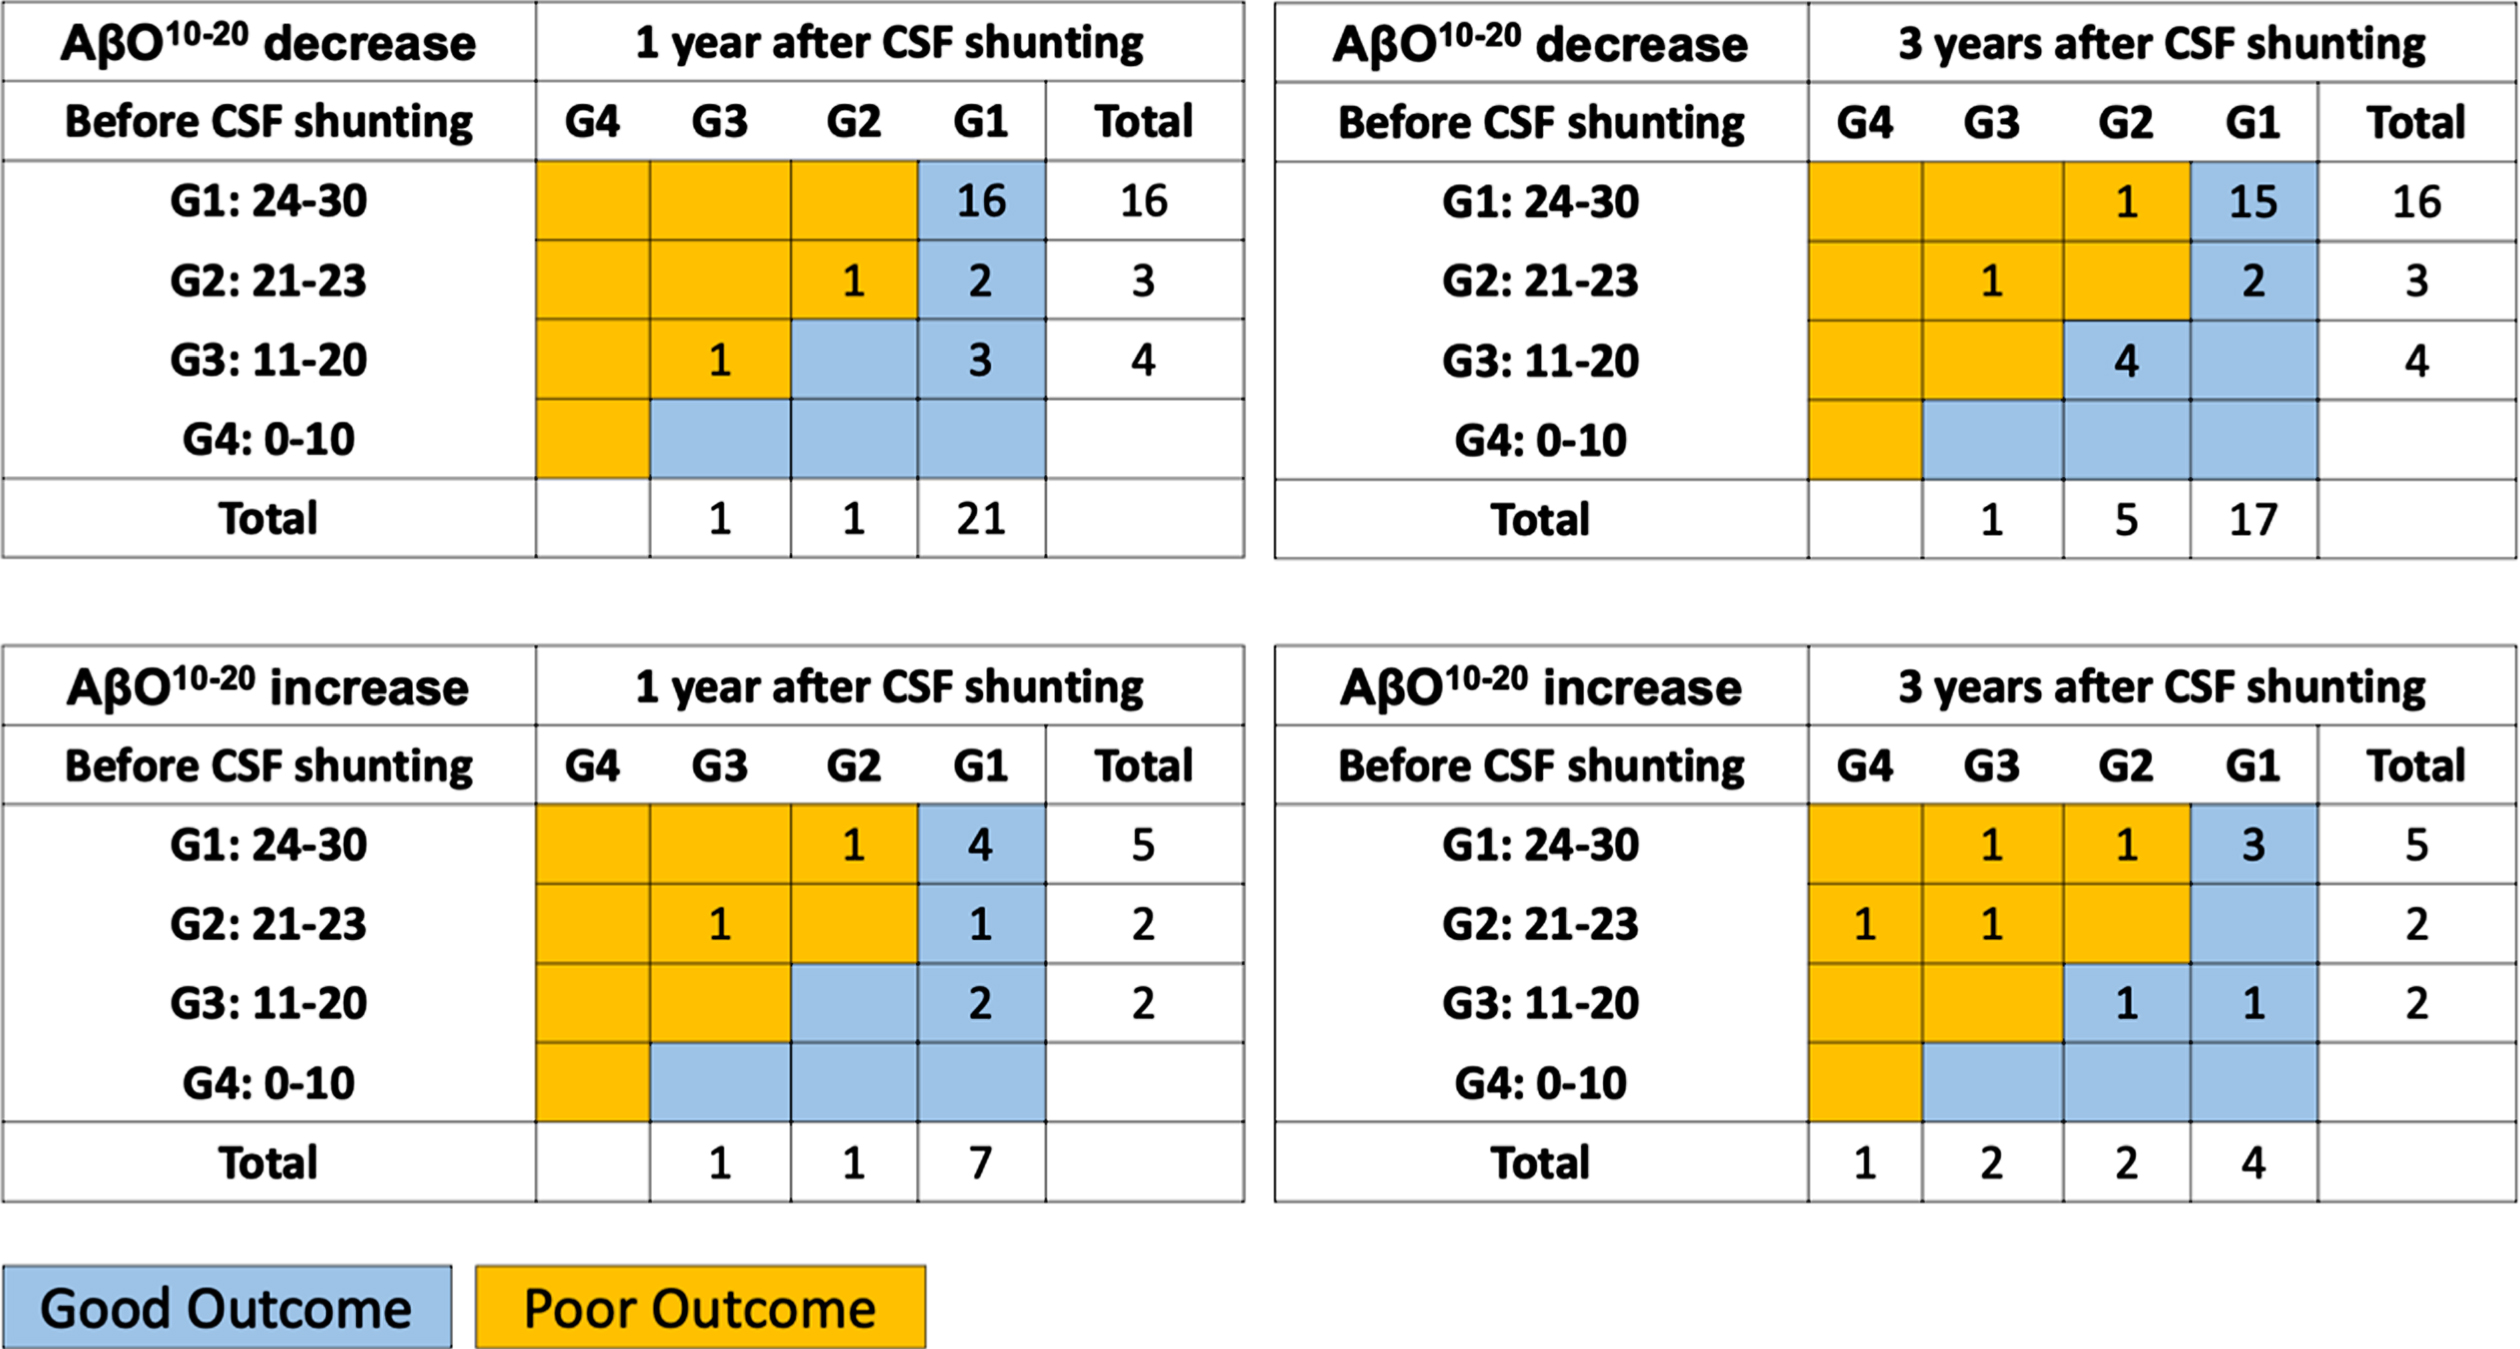 Cognitive outcomes in AβO10–20 decrease and increase subgroups. A distribution of preoperative and postoperative grade of dementia severity according to MMSE scores in AβO10–20 decrease and increase subgroup displayed as the table. Numbers in each box indicate the number of patients. Blue boxes indicate patients in “good outcome” and orange boxes indicate patients in “poor outcome”. AβO10–20, amyloid beta oligomer10–20; CSF, cerebrospinal fluid; G, grade.